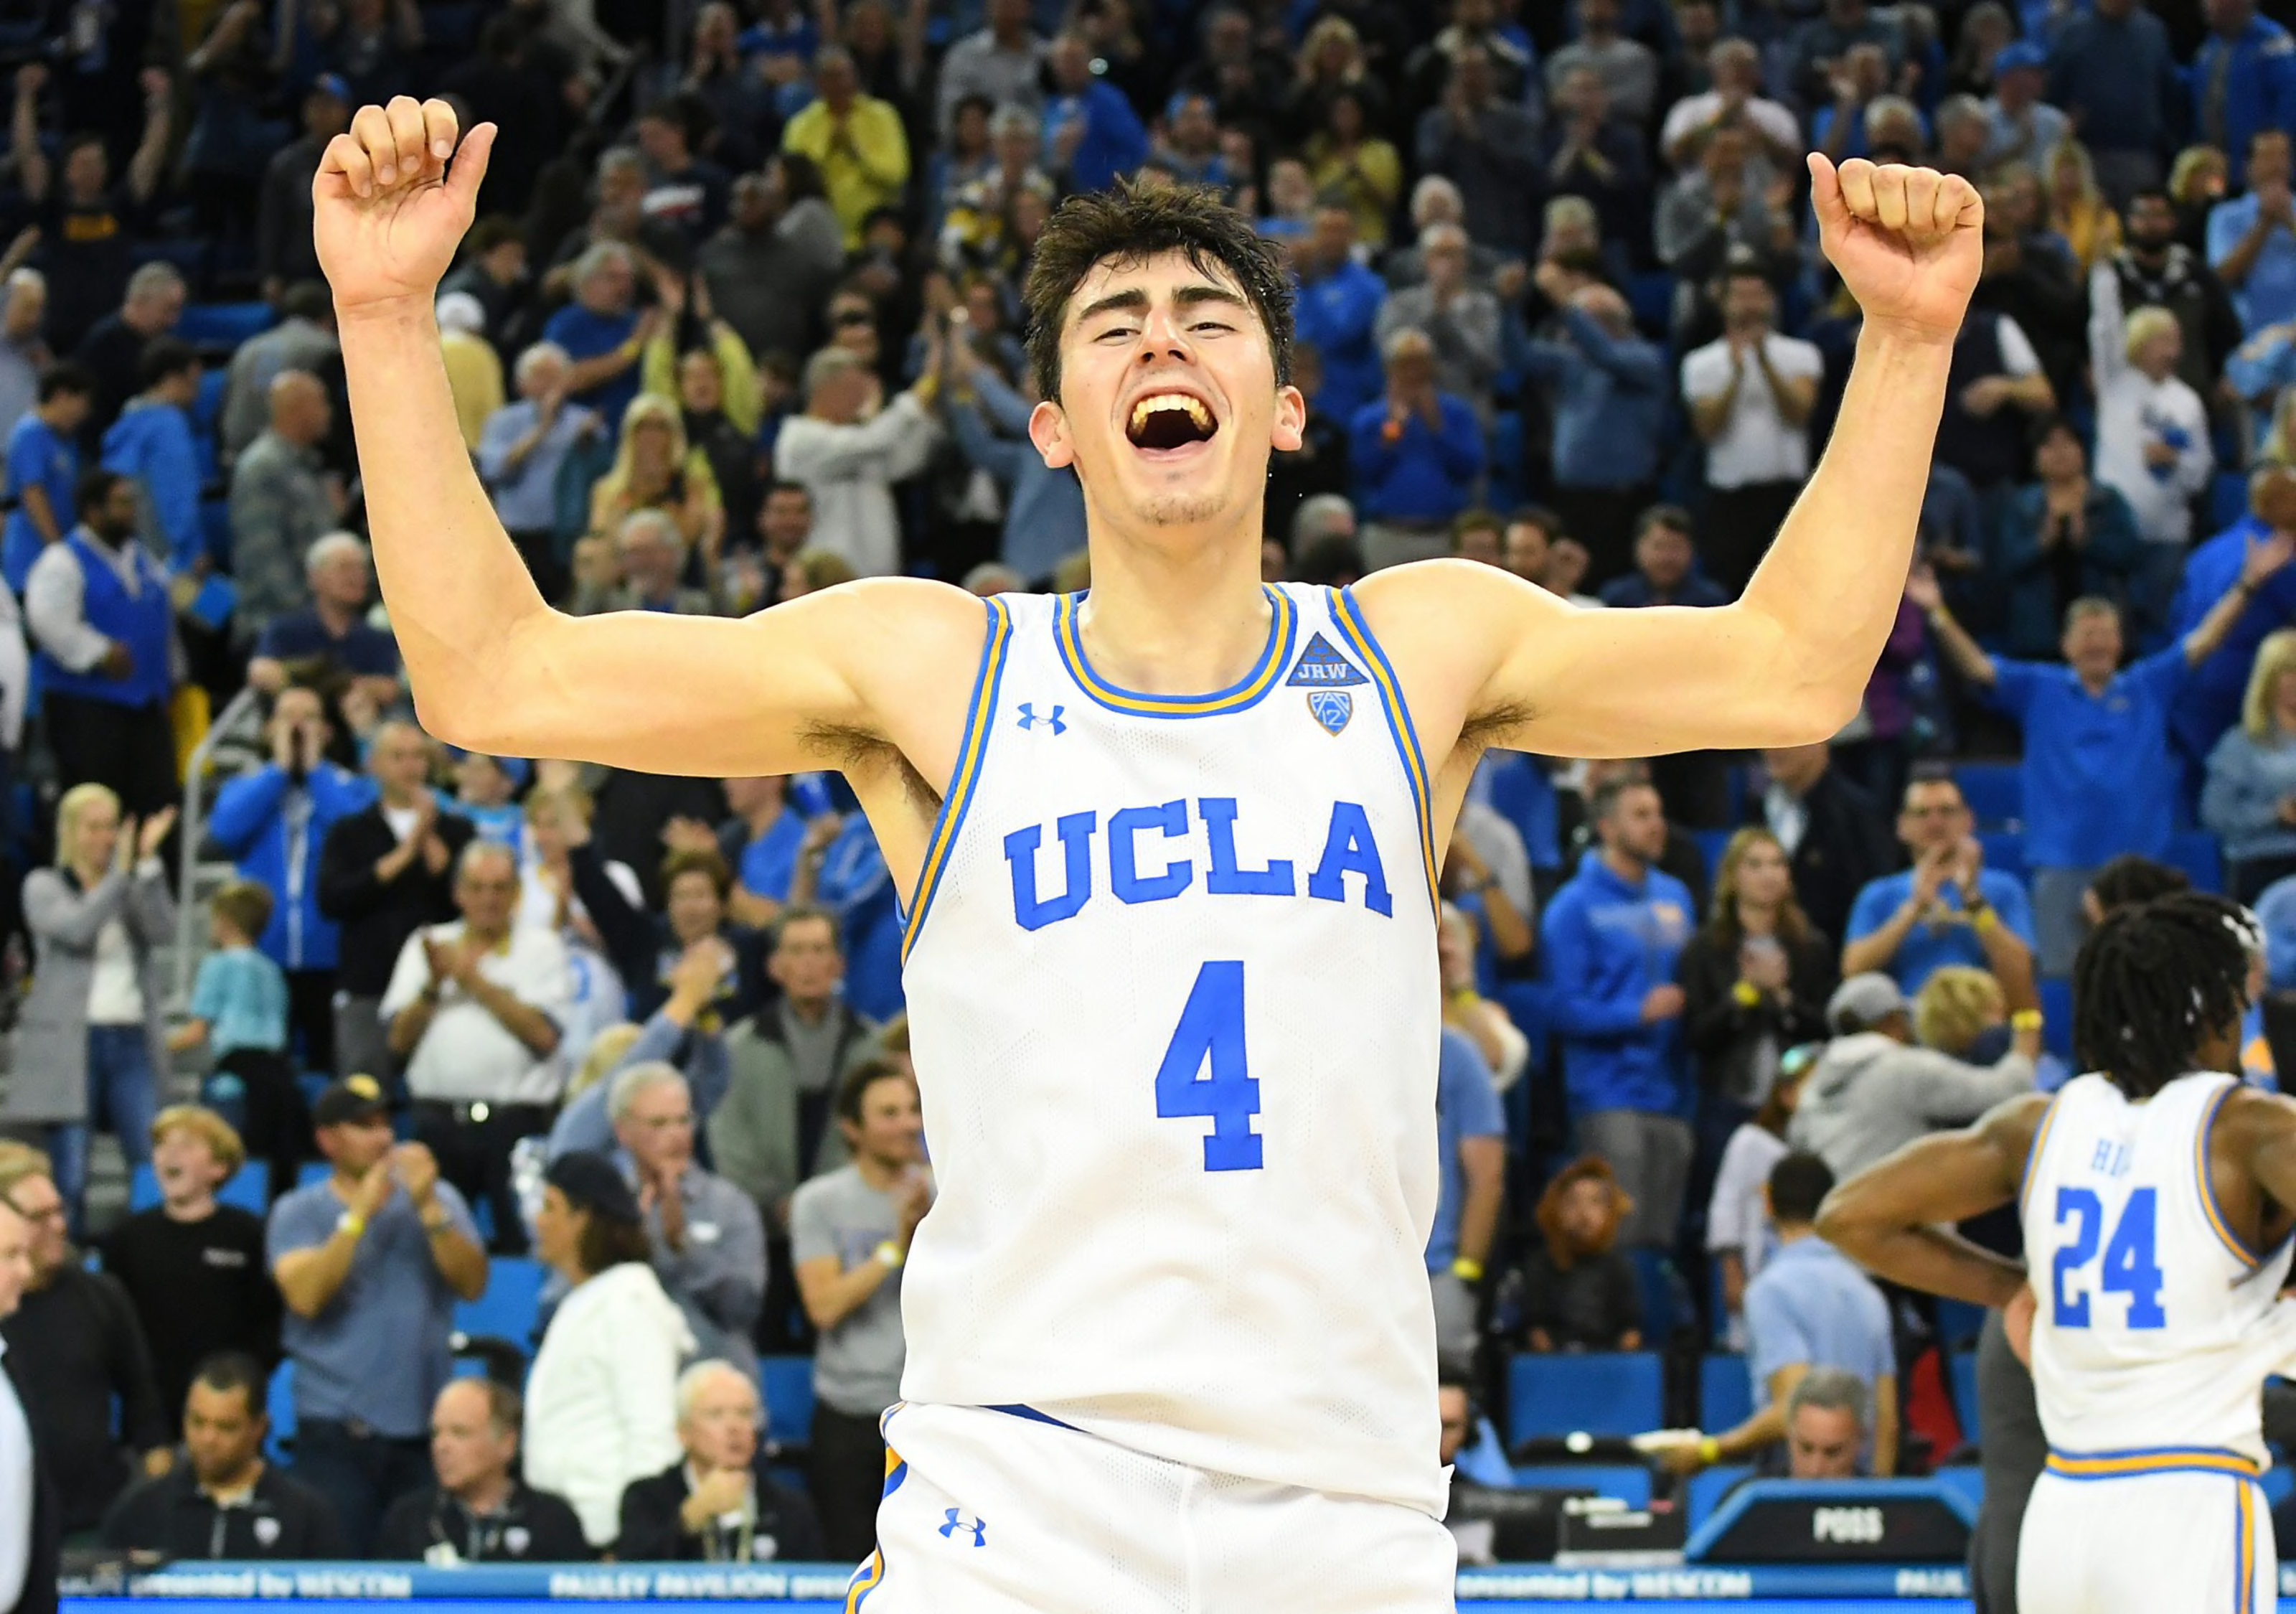 Ncaa Basketball Ucla S Rise Overrated Texas Tech And More Takeaways